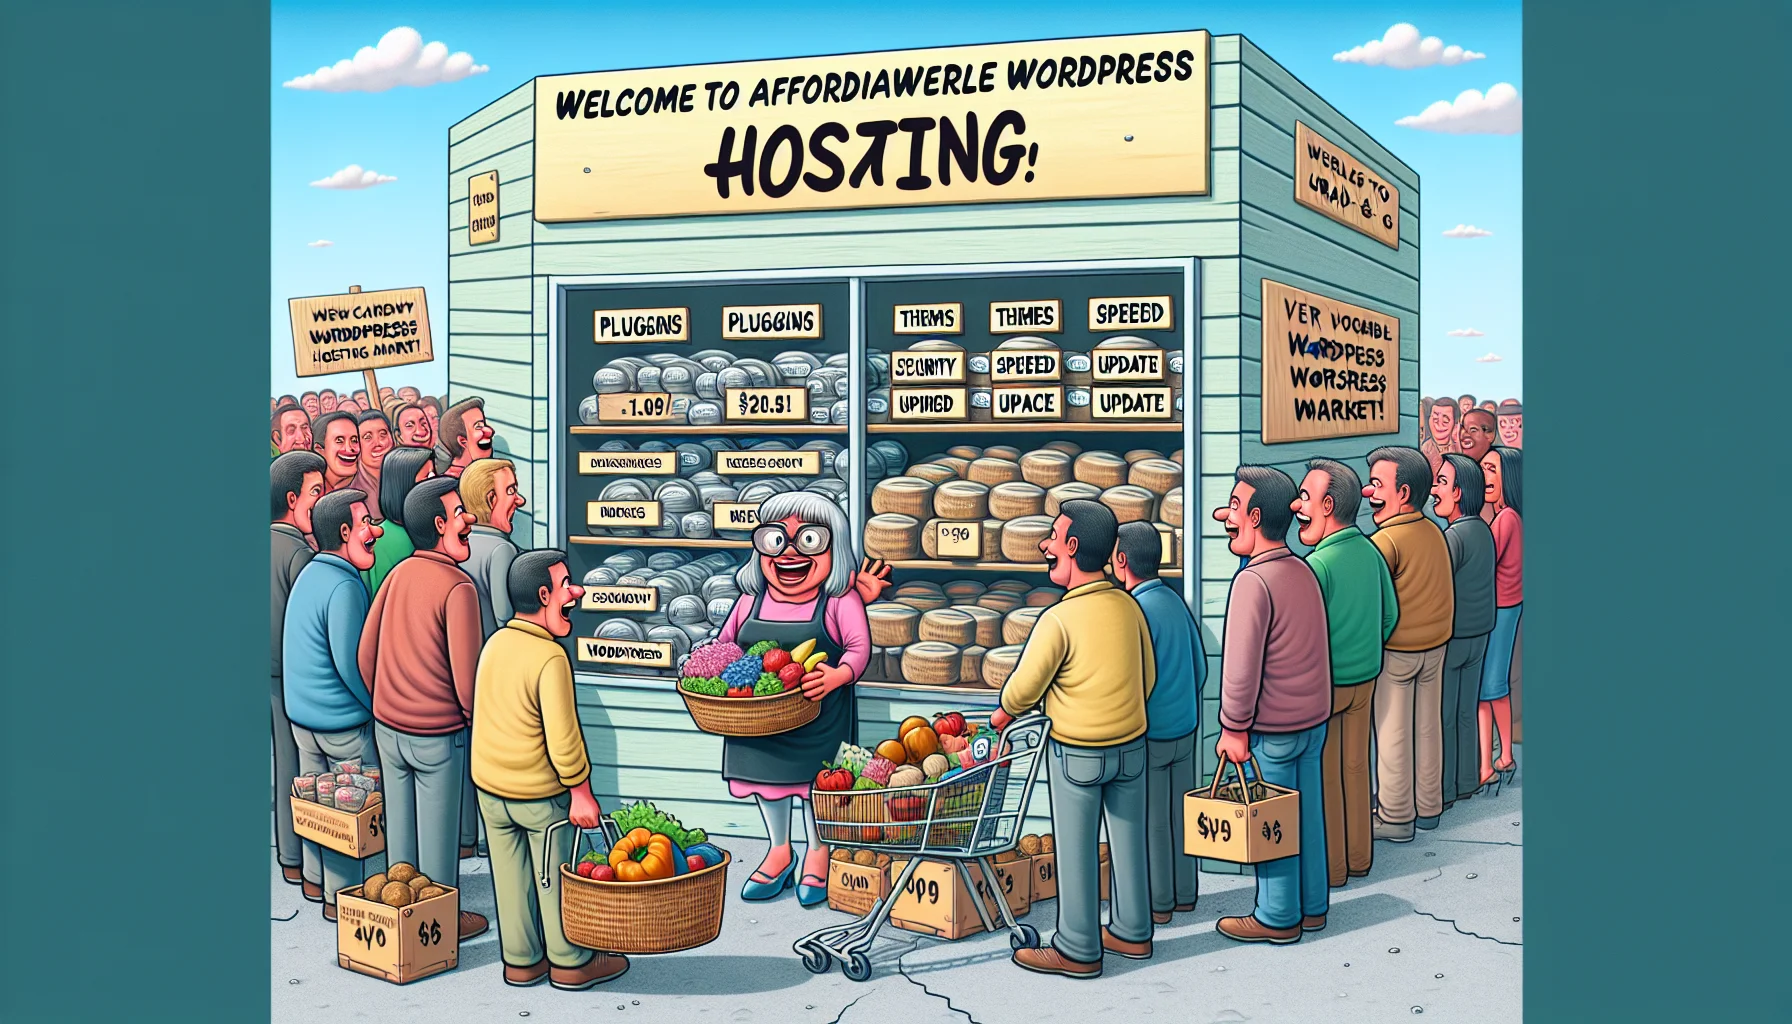 Generate a humorous and visually appealing image illustrating the concept of inexpensive WordPress hosting. The scene should depict a small grab-and-go grocery shop in which various goods labelled 'Plugins', 'Themes', 'Security', 'Speed', 'Update', and 'Backup' are being sold at very affordable prices. A web developer, a middle-aged Hispanic woman, is excitedly shopping with a basket full of these items all marked 'WordPress'. On the storefront, a sign reads 'Welcome to Affordable WordPress Hosting Market!'. A crowd, consisting of people of different genders and descents, waits in line, eager to enter. The spirit of the image should be lively and entertaining, whilst farcically drawing a parallel to the idea of purchasing web hosting services.